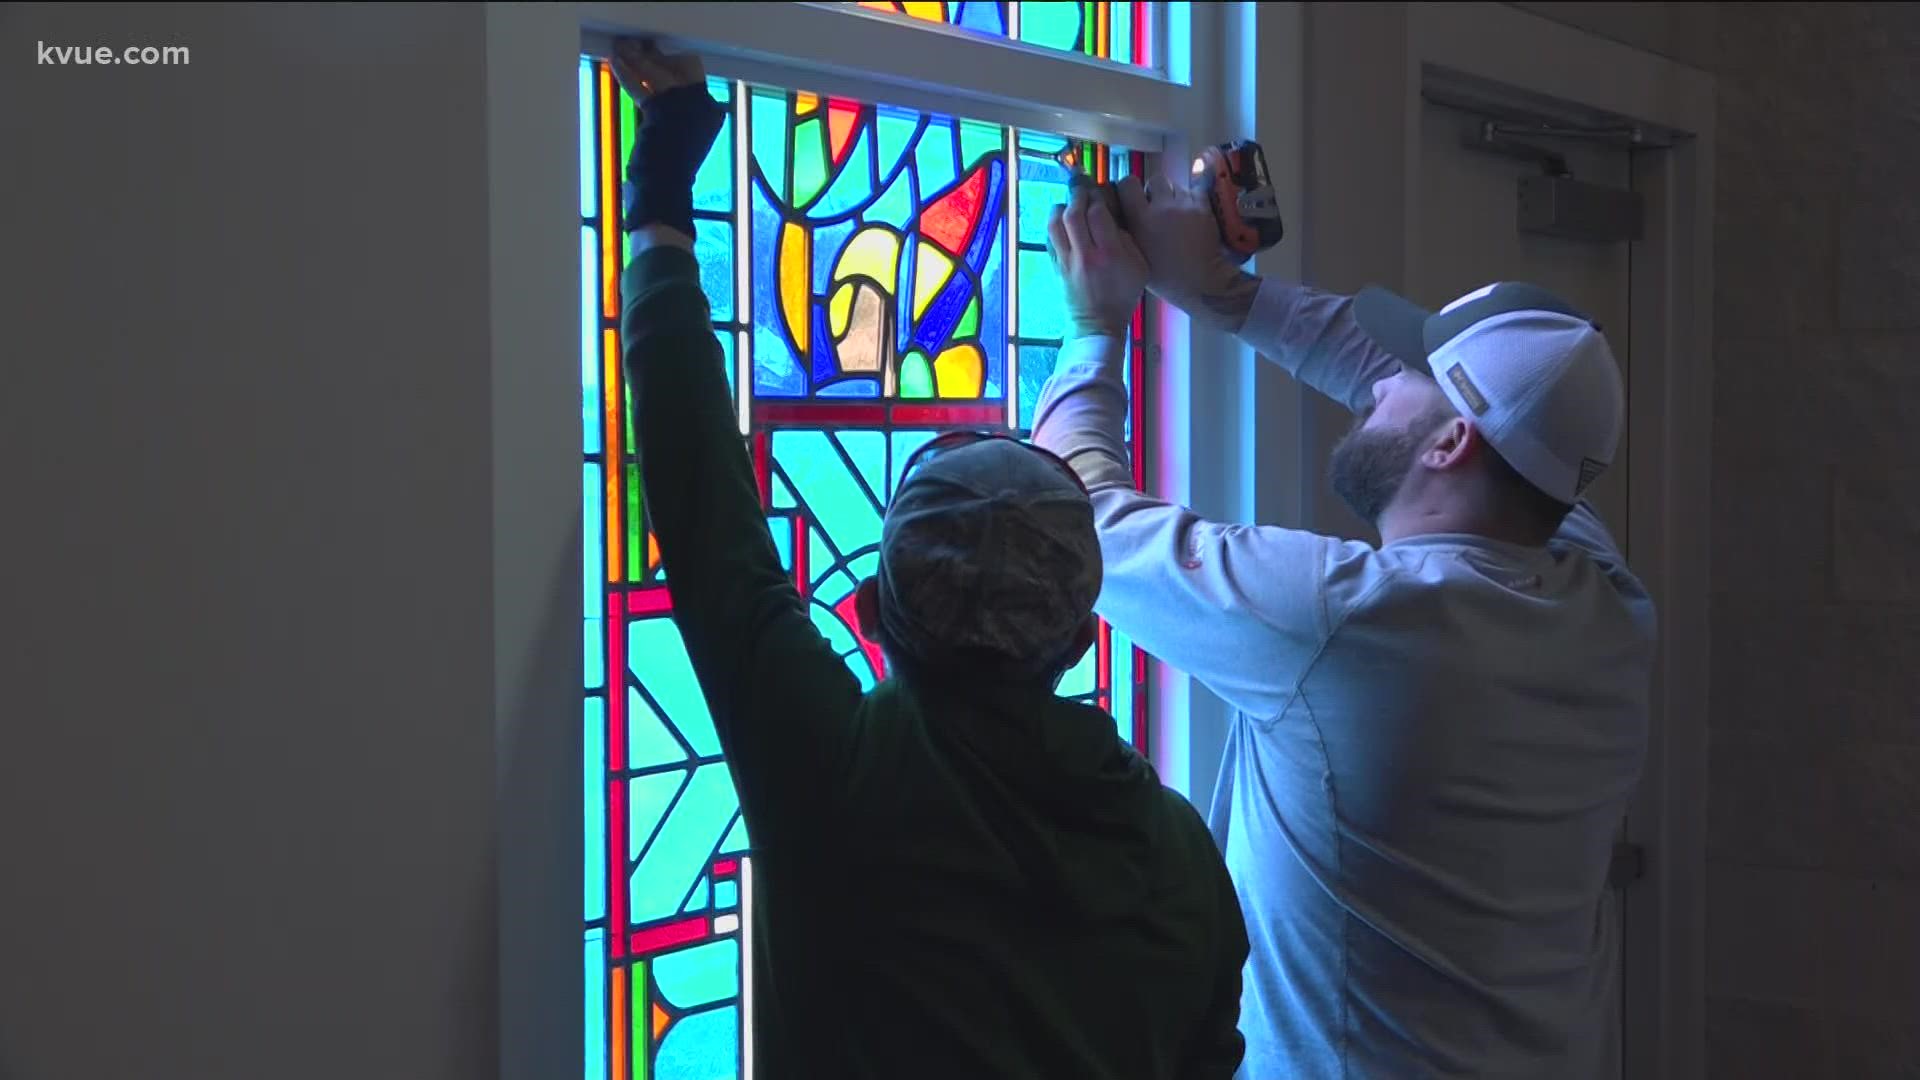 A church that was vandalized on Christmas Eve had its stained glass windows reinstalled this week. The pastor said the ordeal brought the church together.